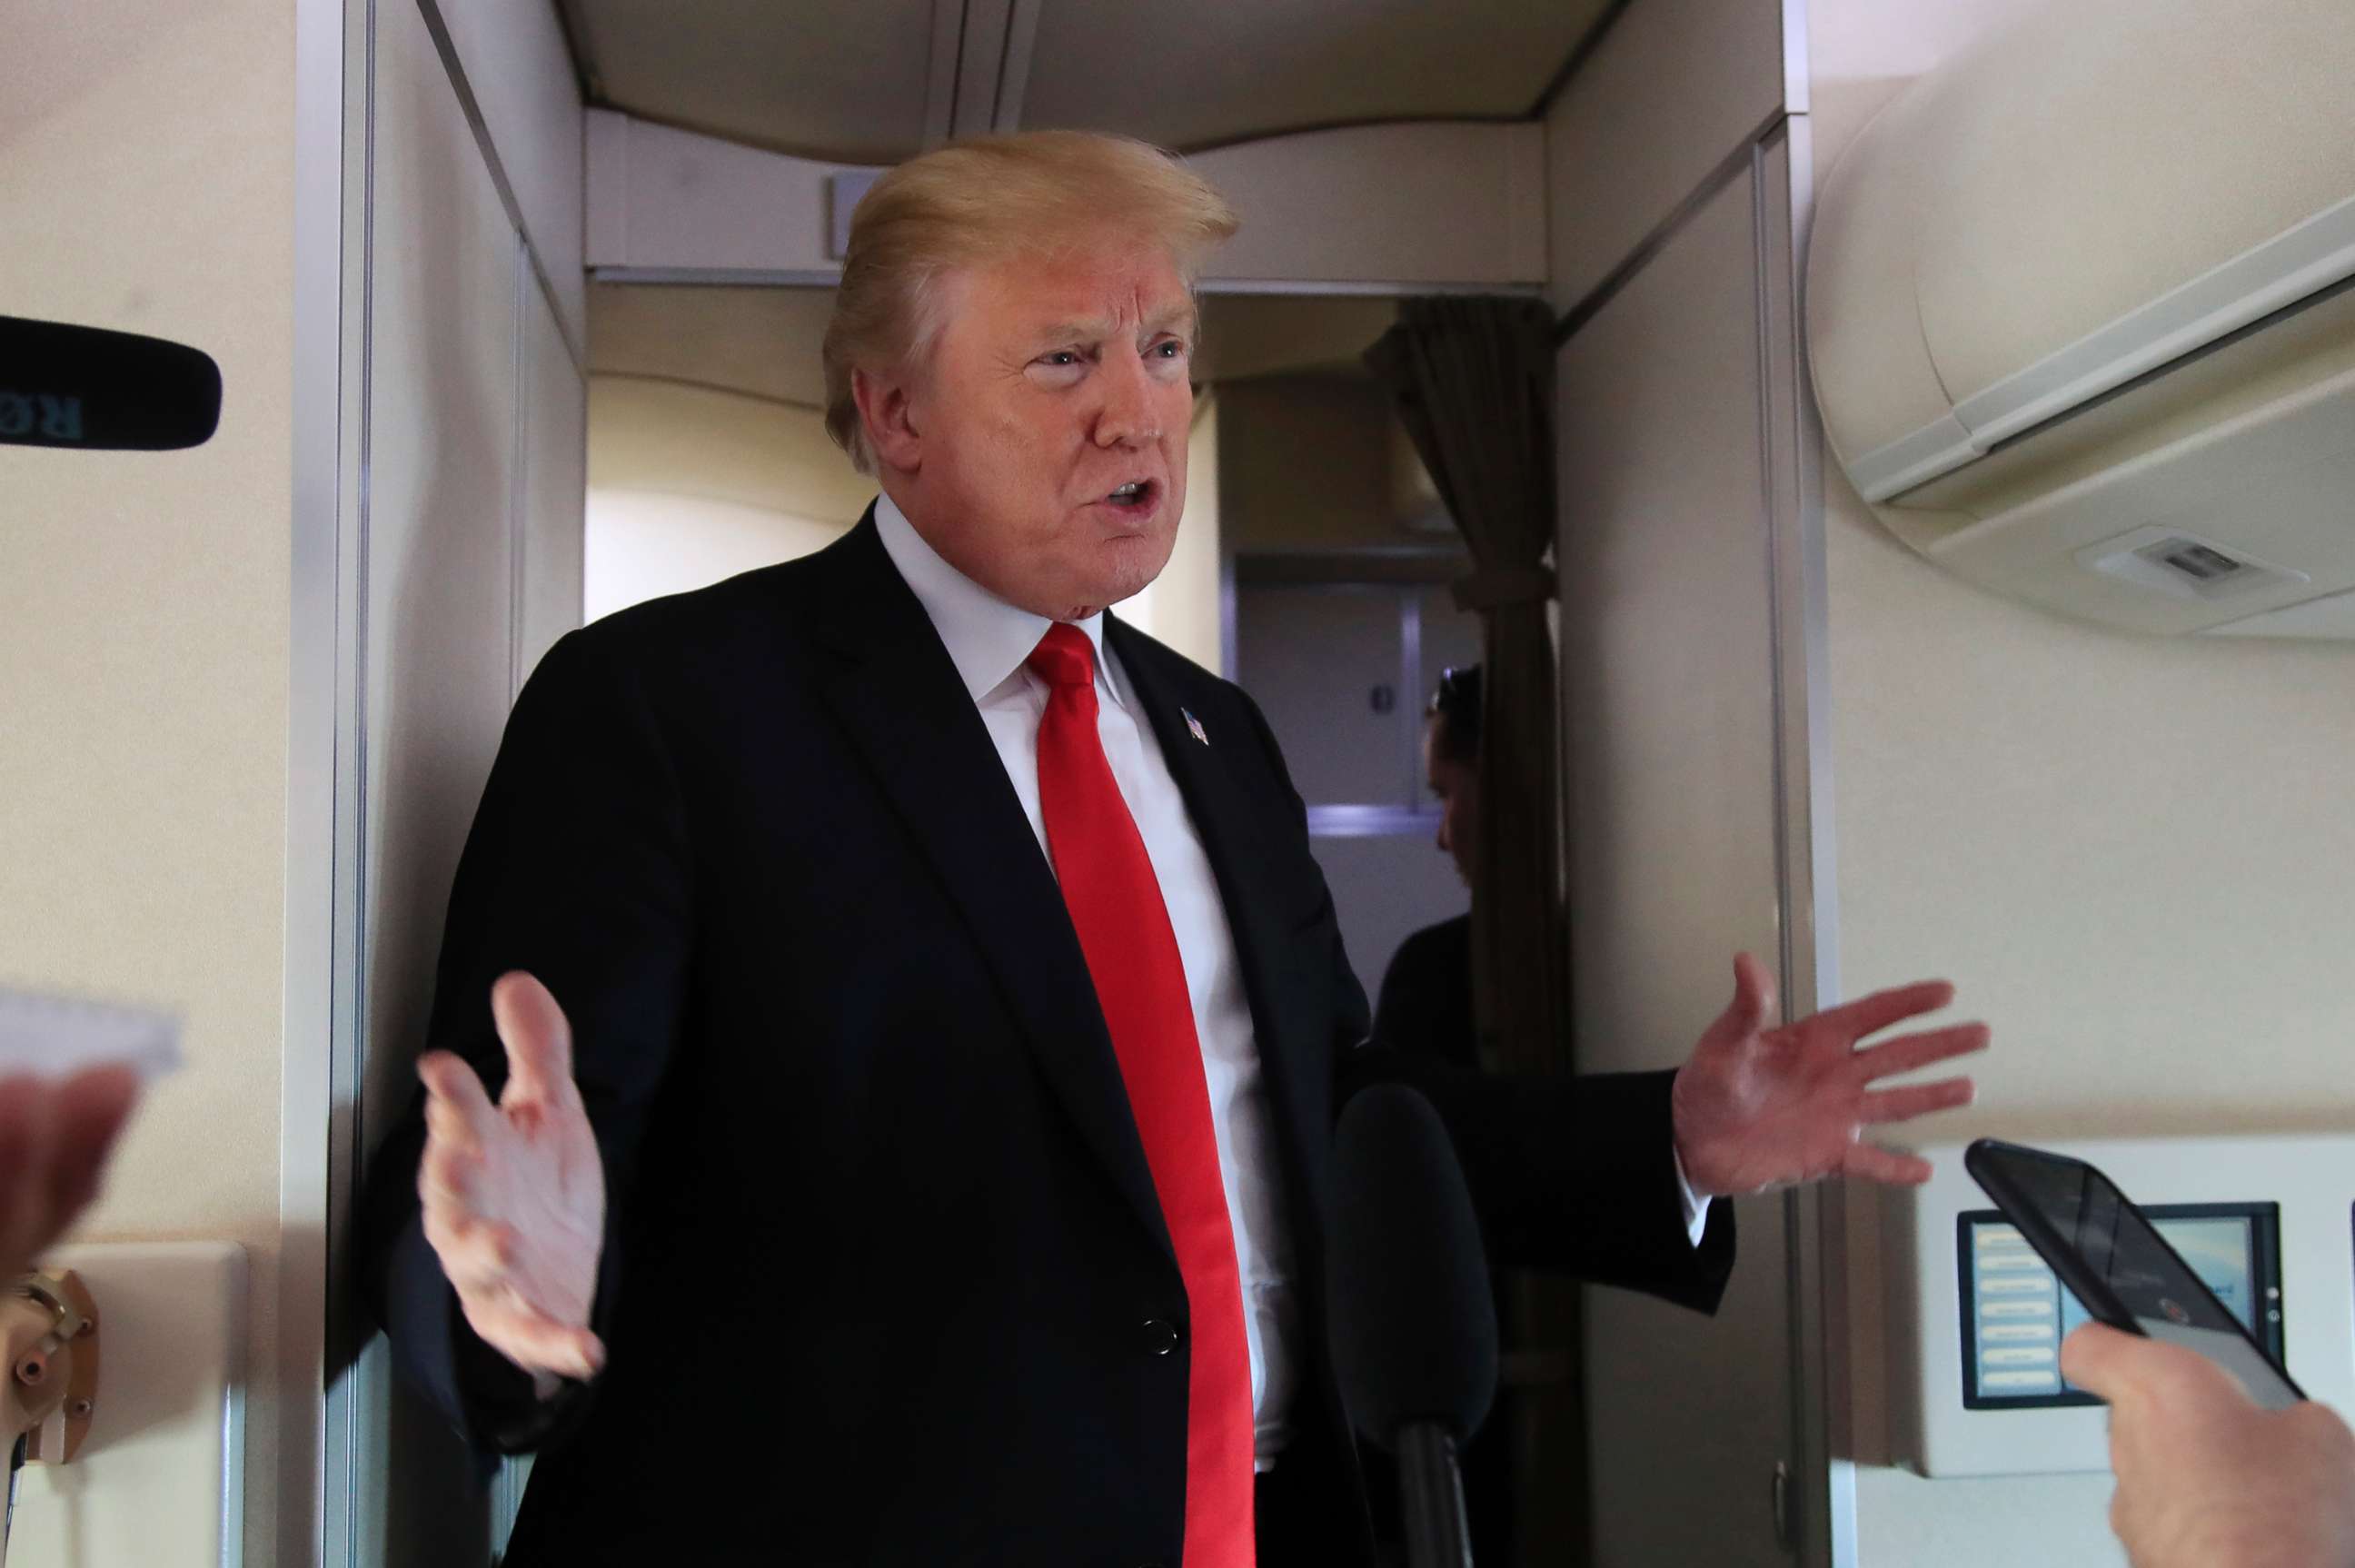 PHOTO: President Donald Trump speaks to reporters on board Air Force One, June 29, 2018, on his way to Bedminster, N.J.